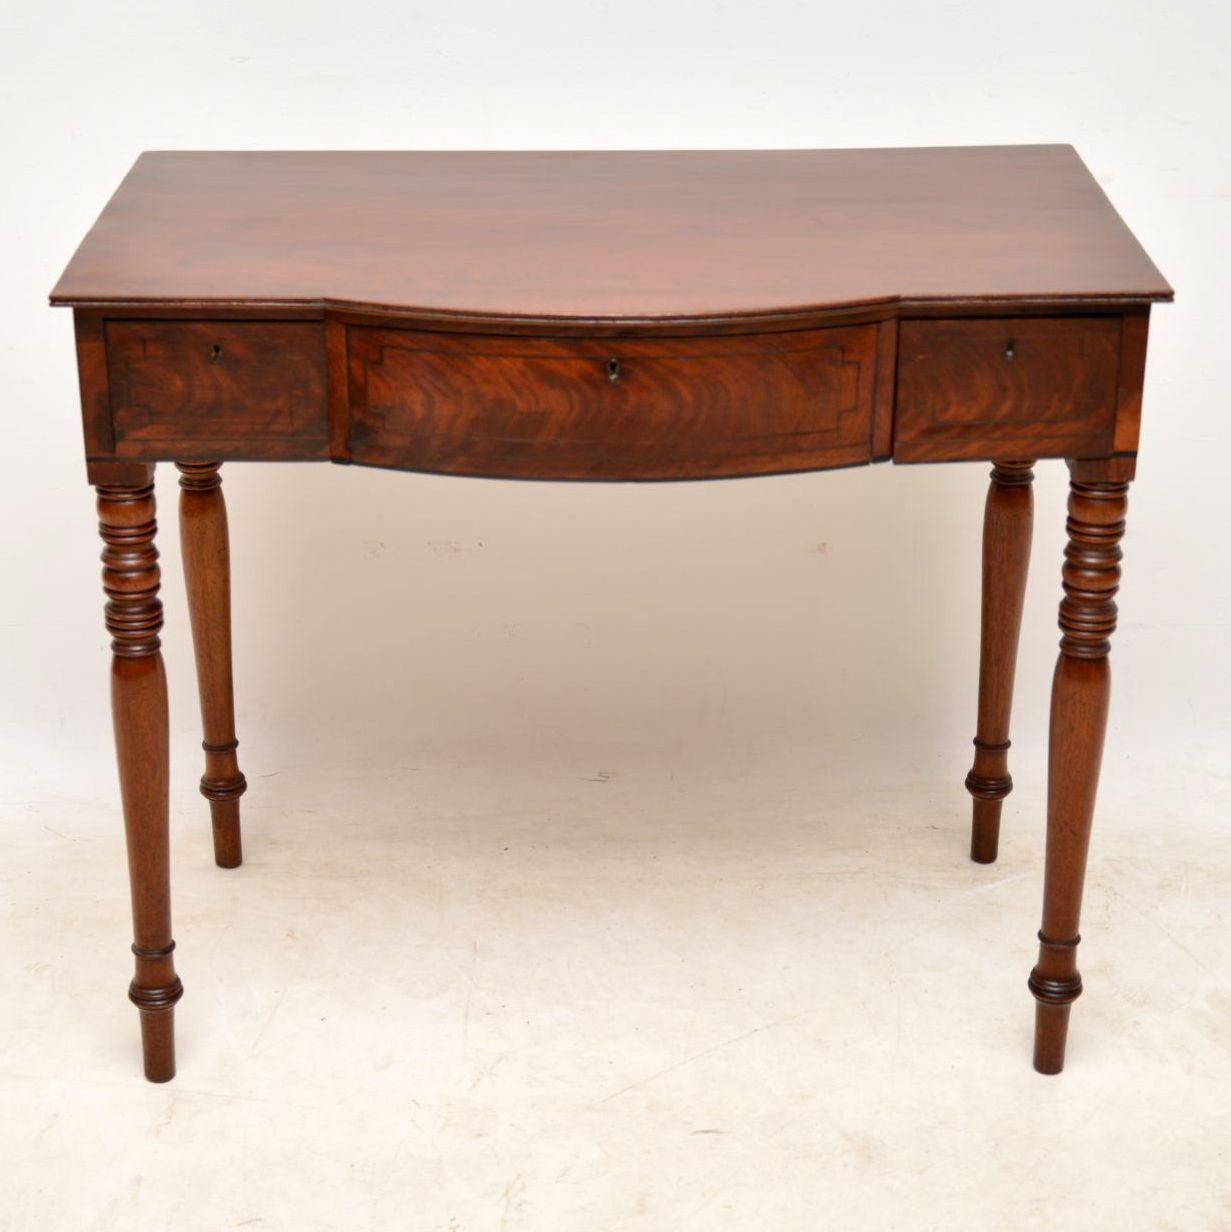 Antique mahogany table in good condition and with a lovely original colour, full of character. I would date this table to around the 1820s-1840s period. It has a solid mahogany top with a lovely grain, flame mahogany drawers with fine dovetails,